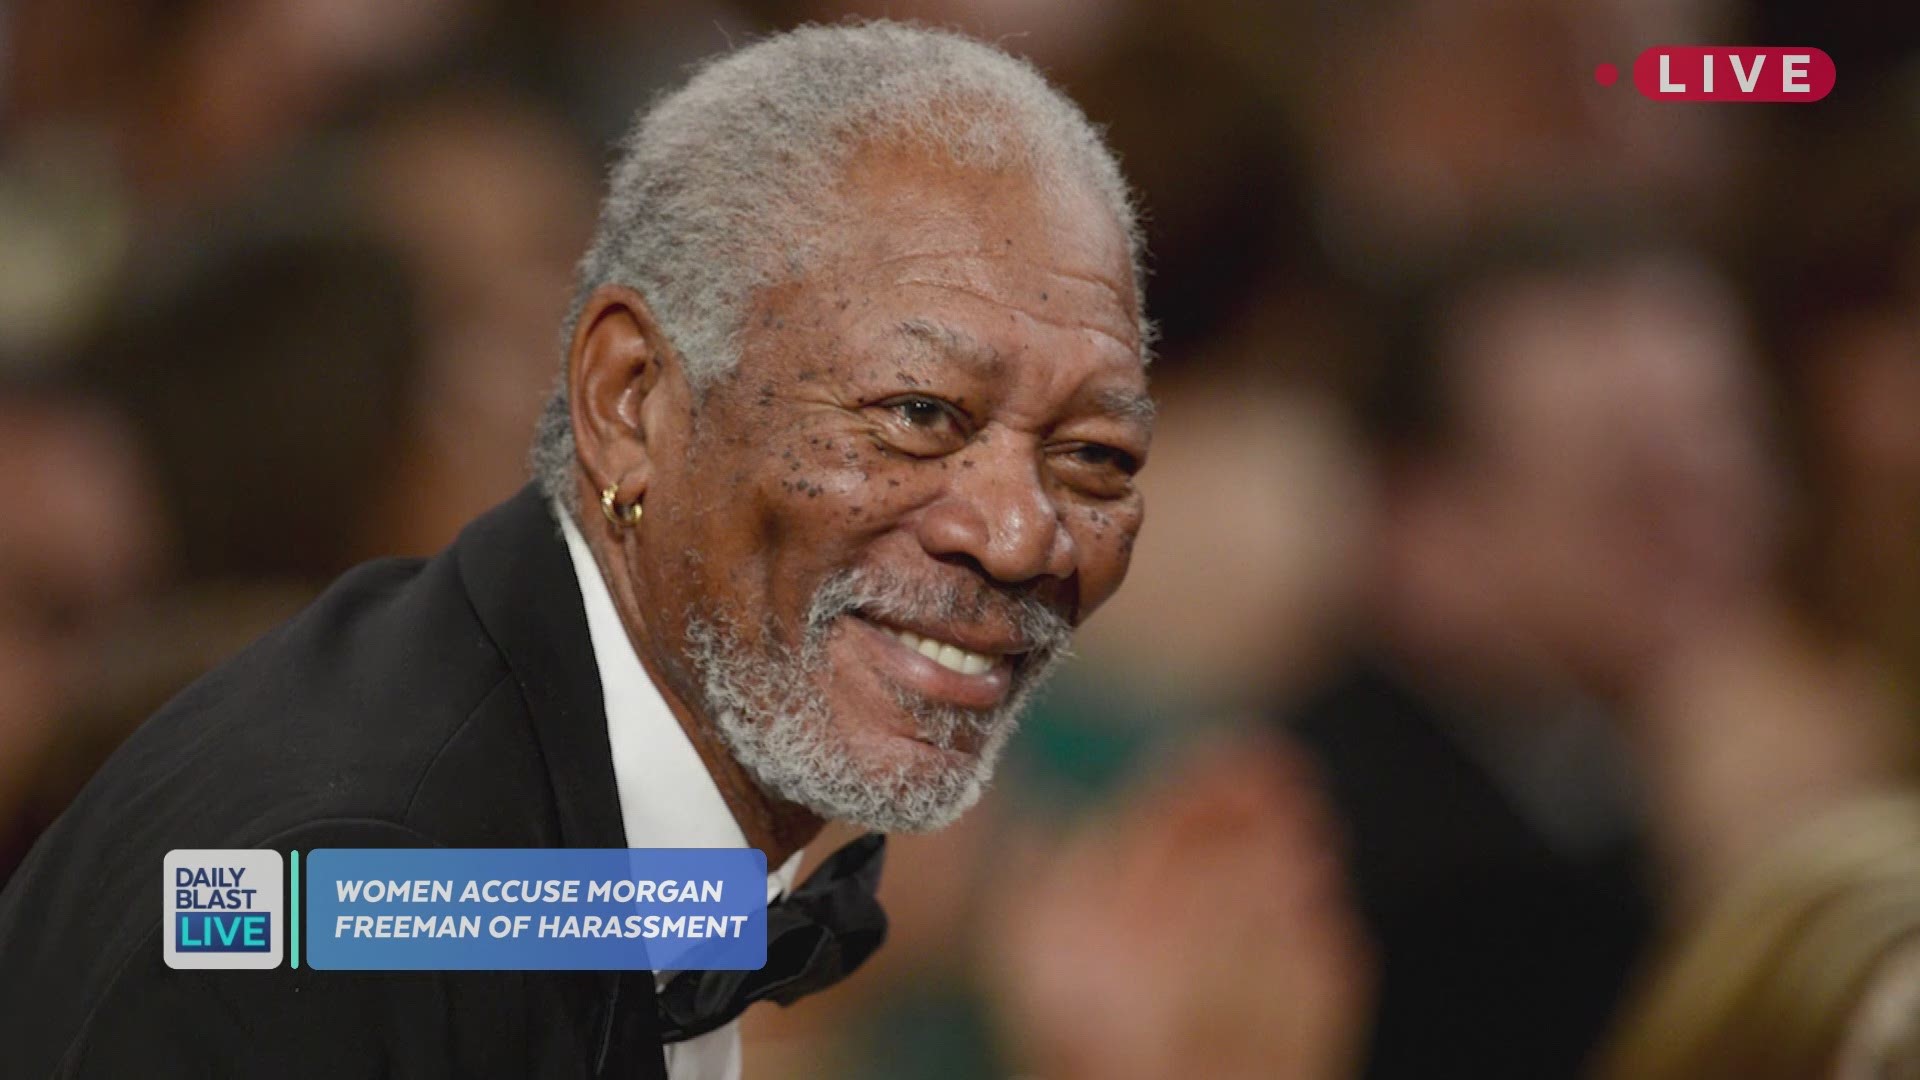 A CNN investigation has uncovered allegations of harassment and inappropriate behavior by veteran actor Morgan Freeman on movie sets and while promoting his projects. Eight people have come forward as victims and eight others told CNN they had witnessed t